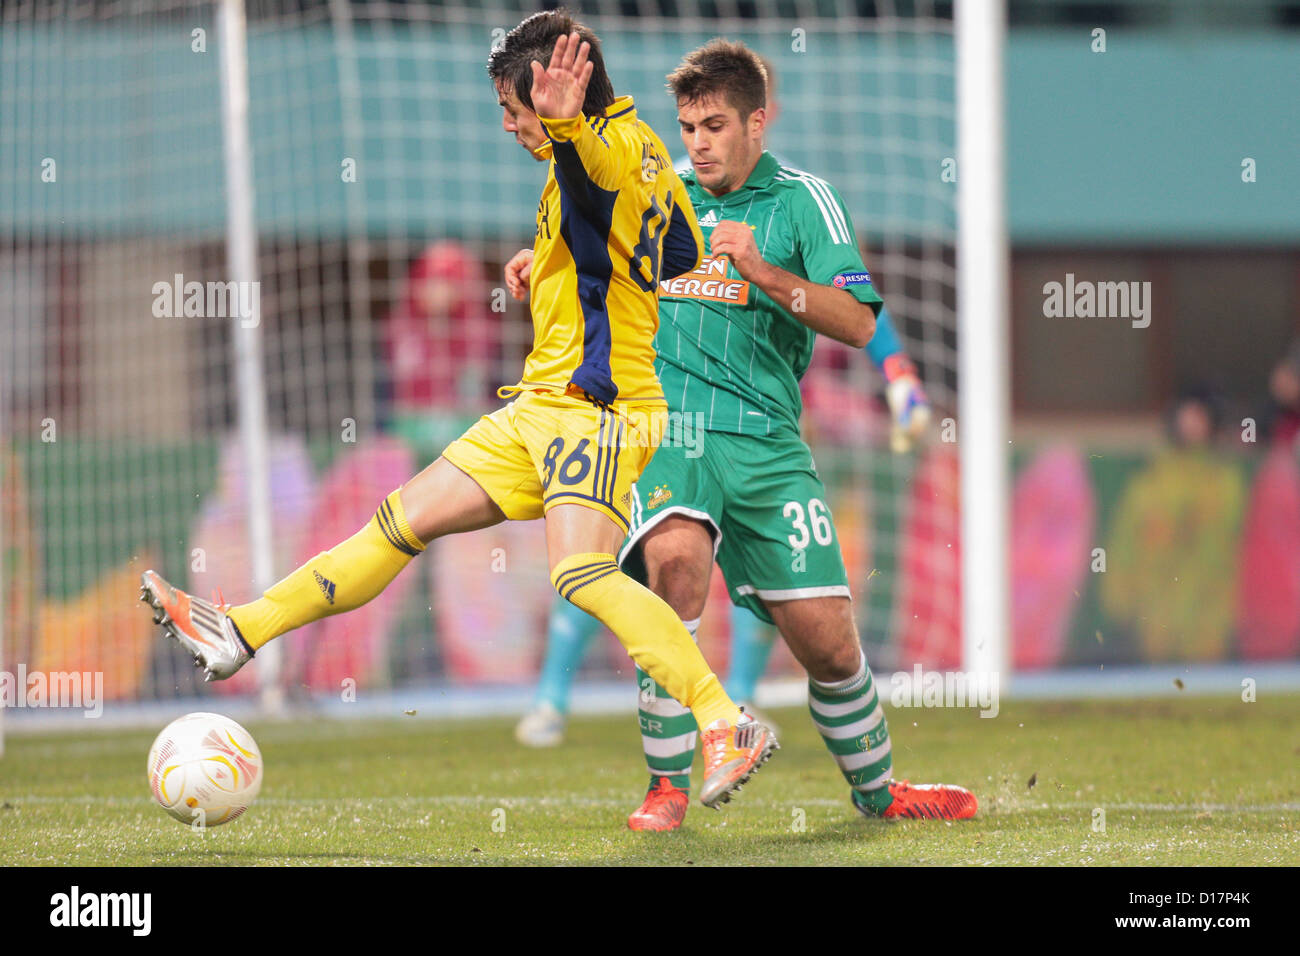 Michael Schimpelsberger (#36 Rapid) and Willian (#86 Metalist) fight for the ball on December 6, 2012 in Vienna, Austria. Stock Photo